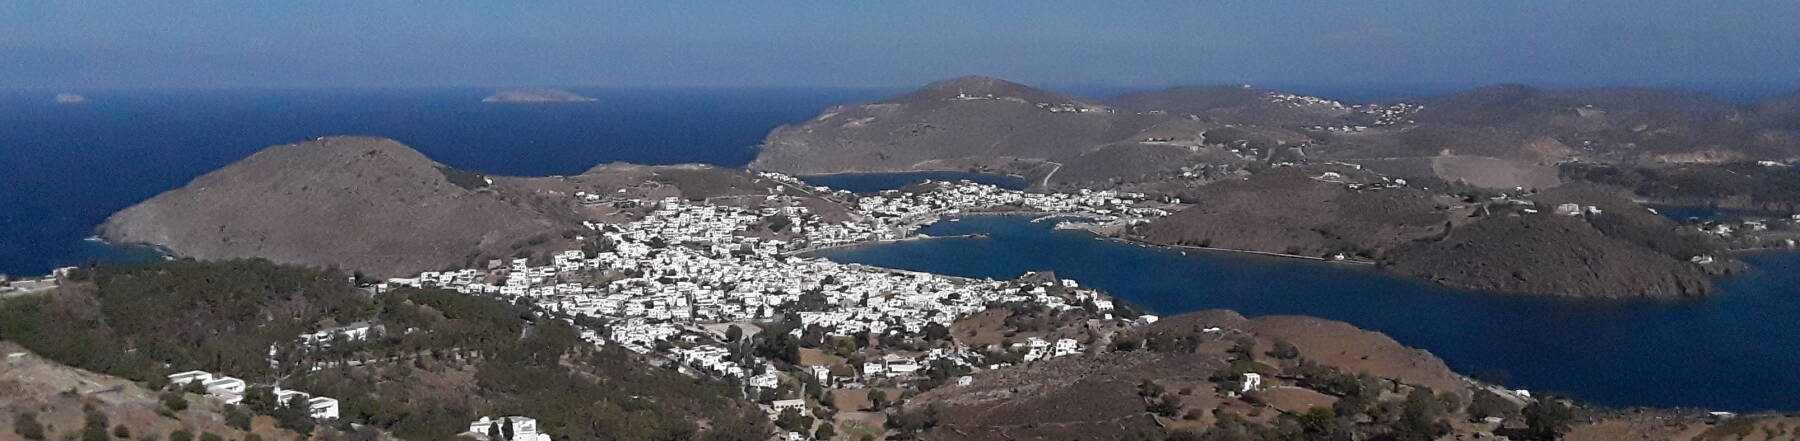 View over Patmos from the Monastery of Saint John the Theologian.